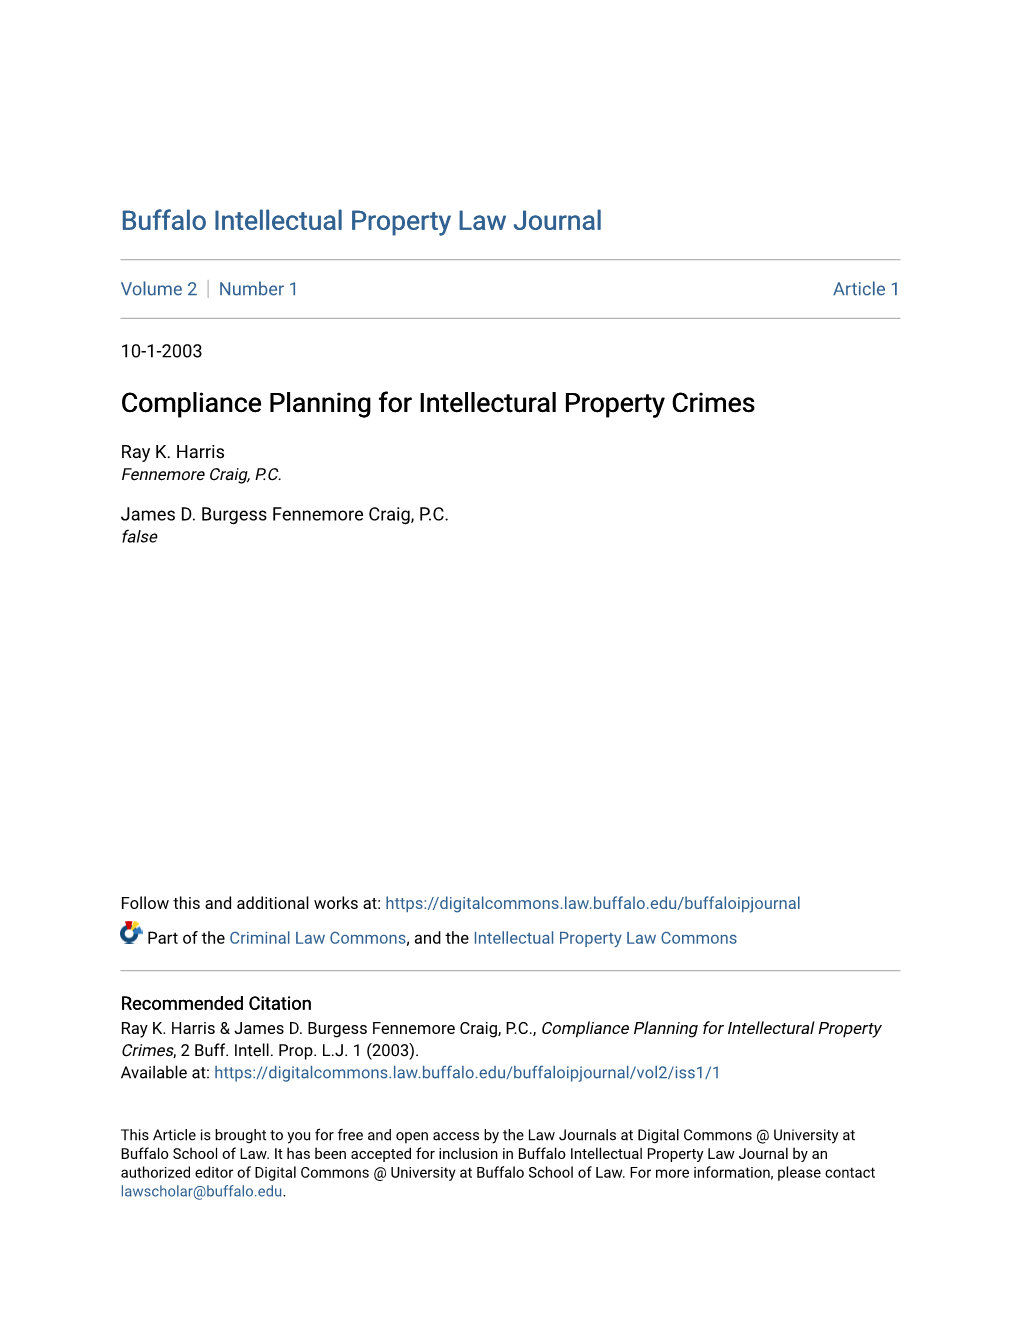 Compliance Planning for Intellectural Property Crimes